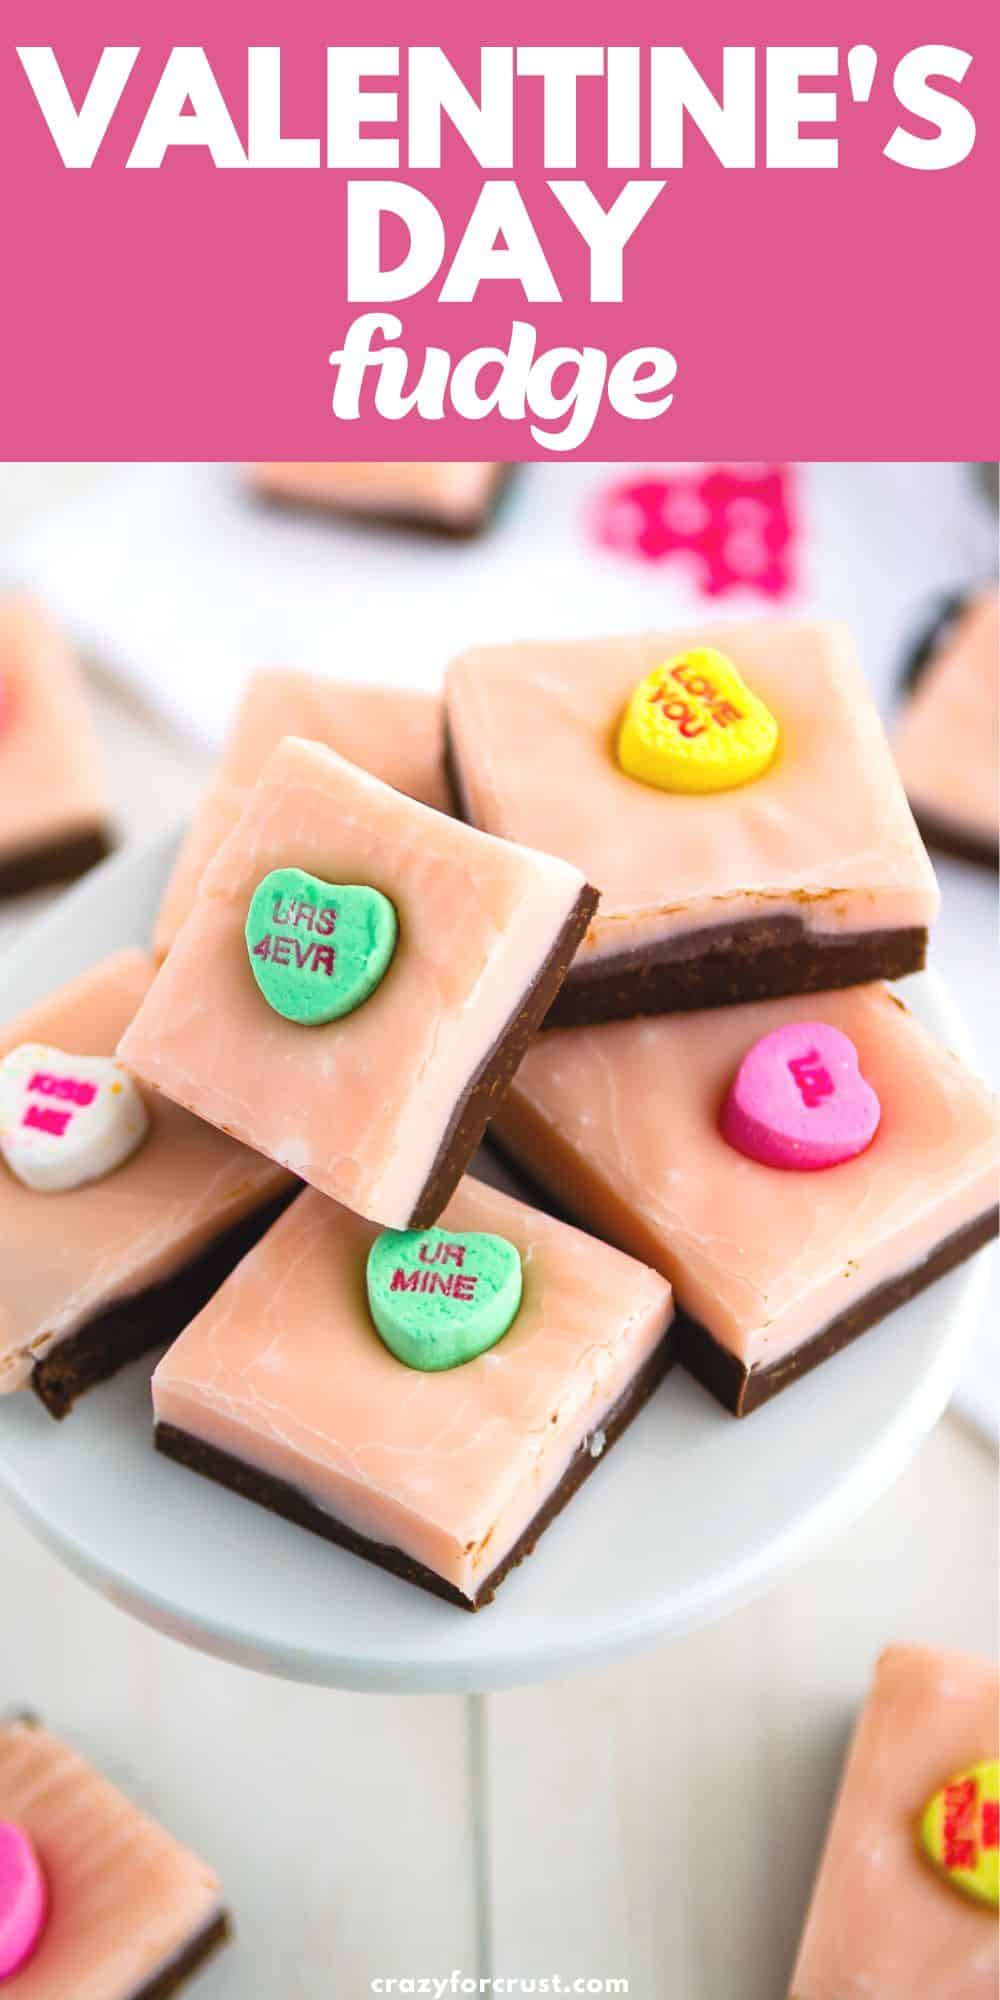 stack of pink and chocolate layered fudge with conversation hearts on white cake stand